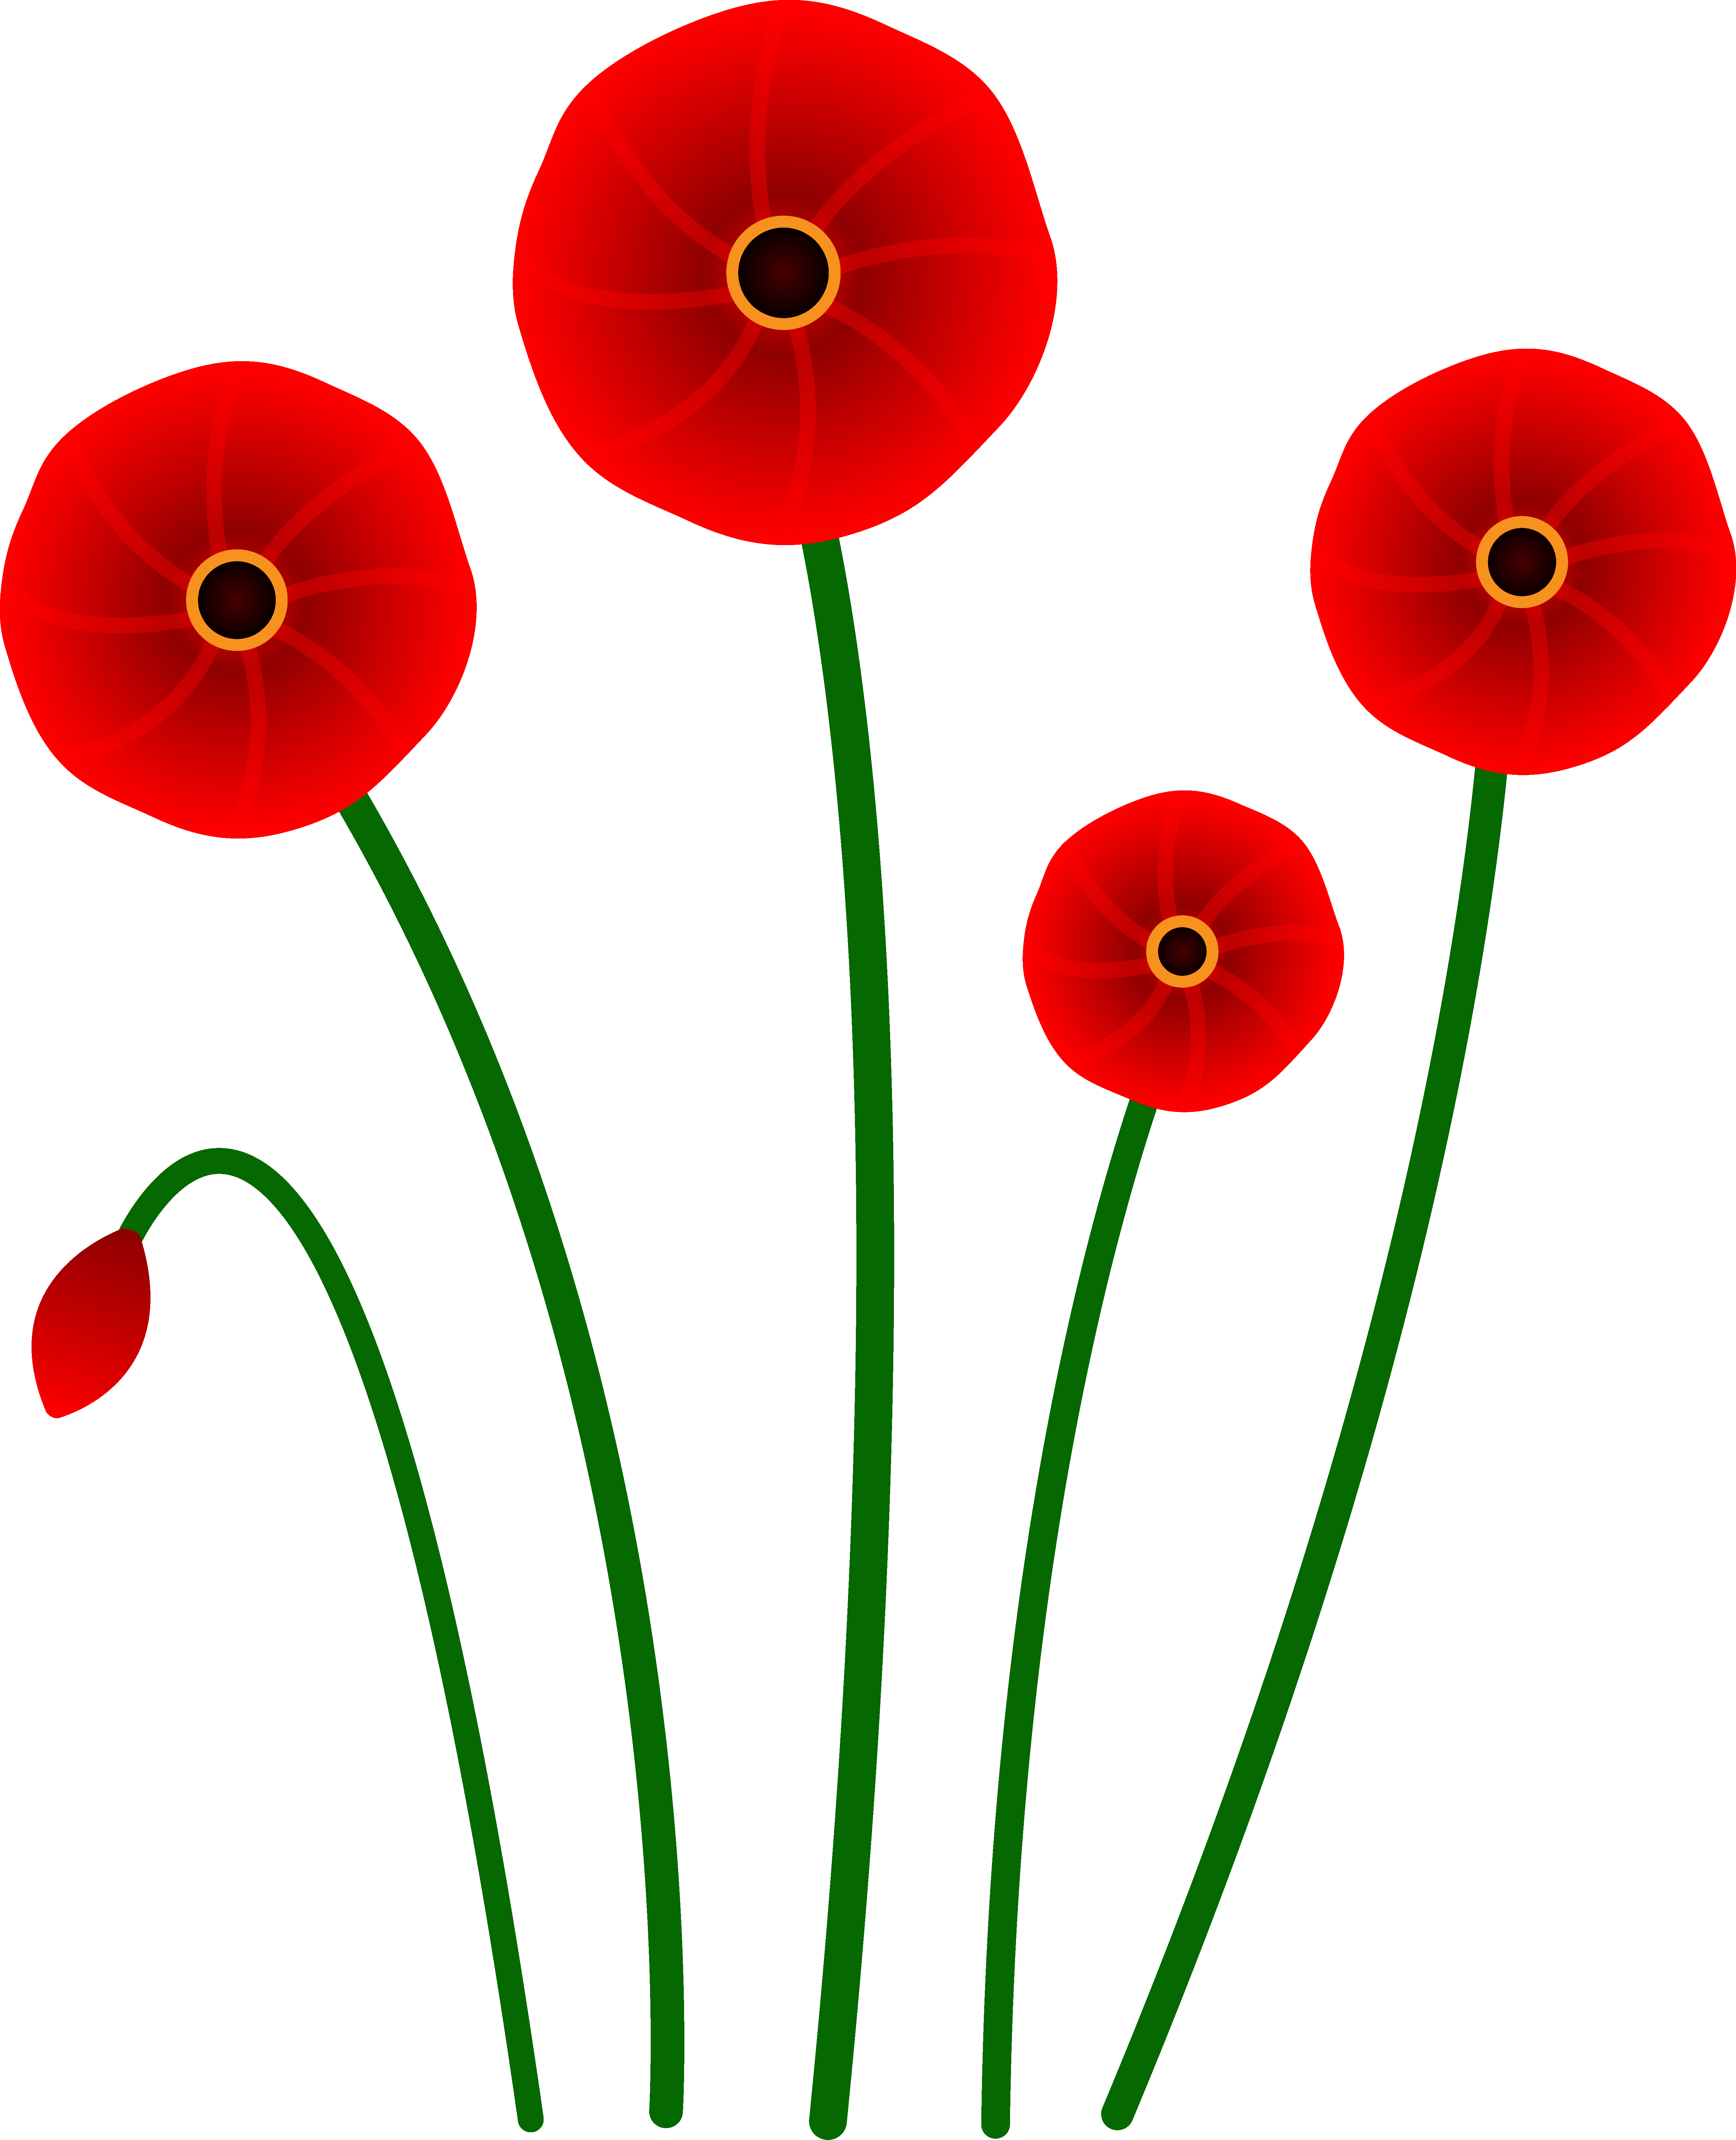 Red Flower clipart #9, Download drawings